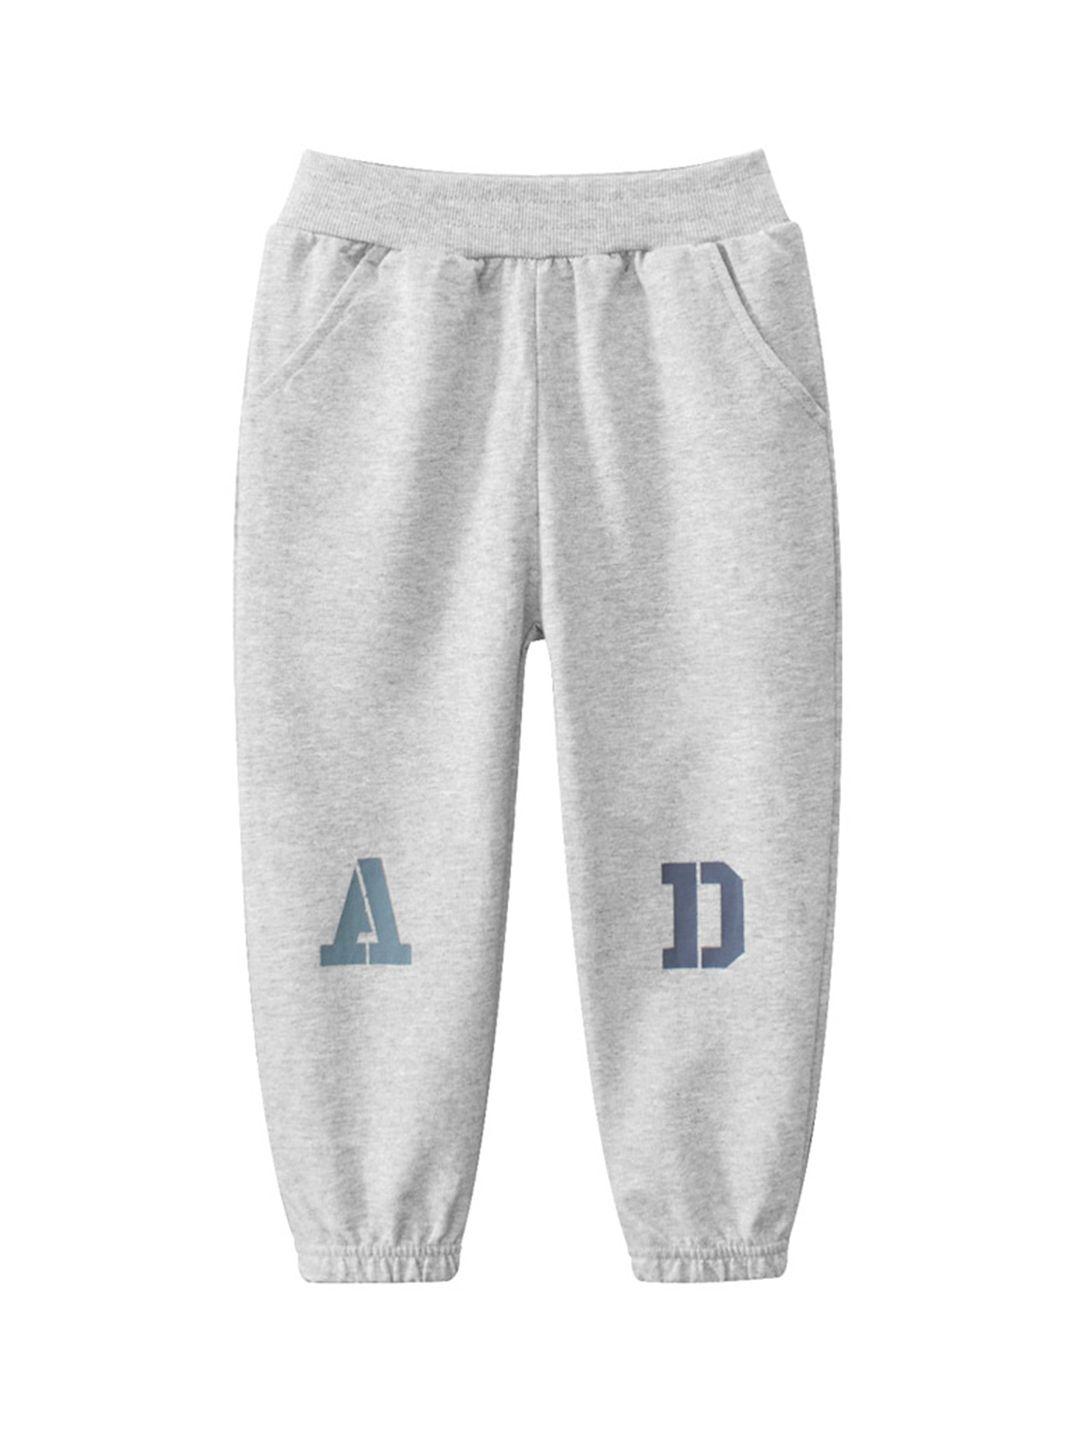 stylecast-boys-grey-printed-easy-wash-cotton-joggers